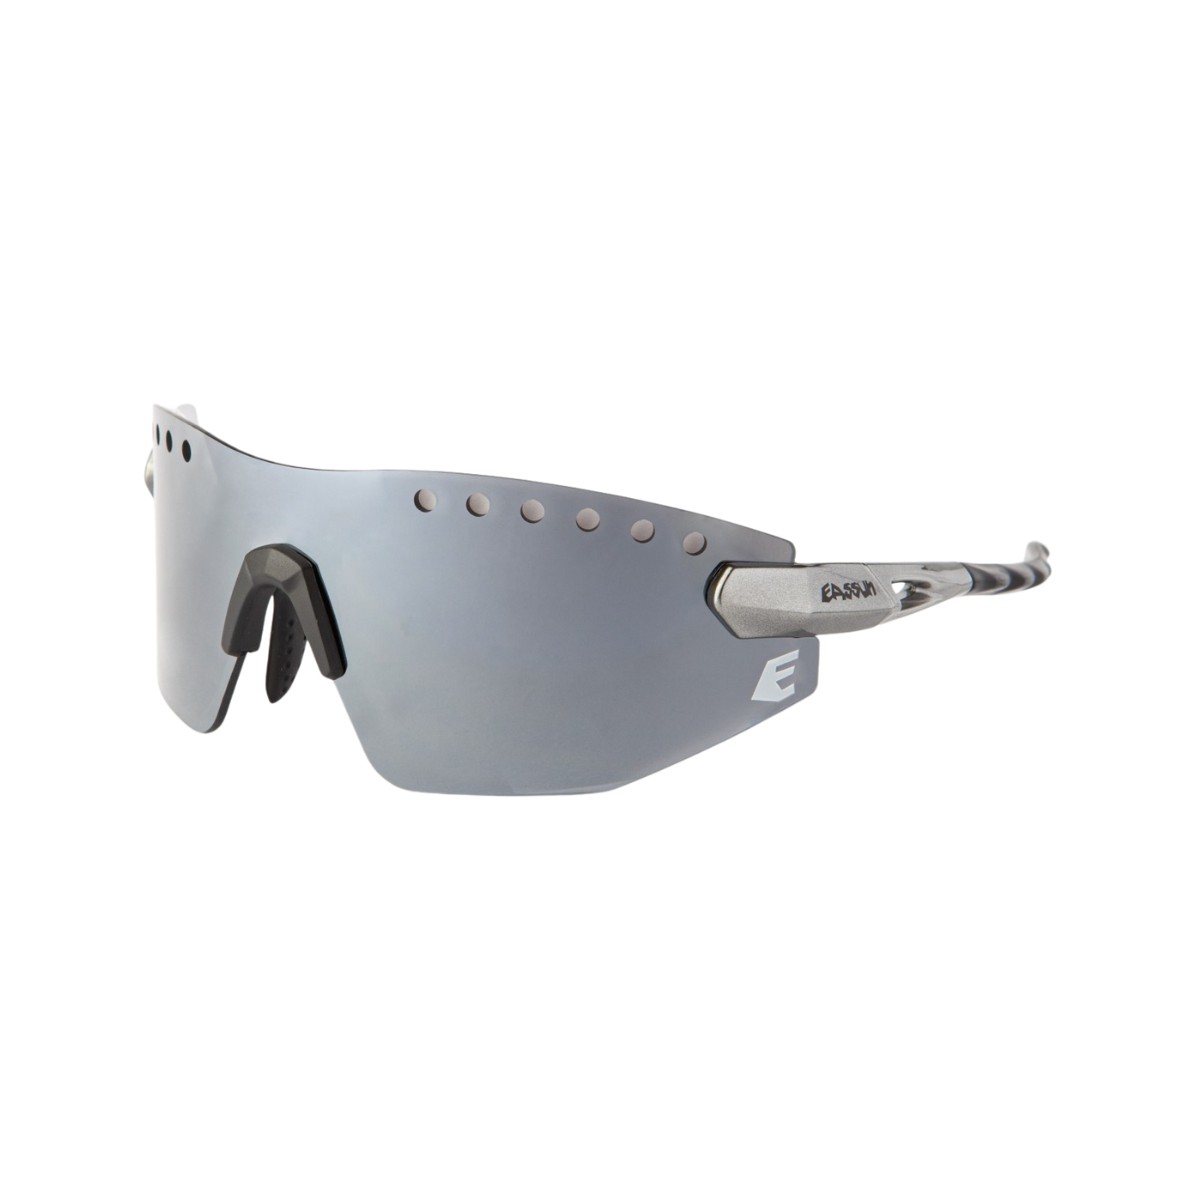 Image of Eassun Armor Silver Brille Silberne Linse